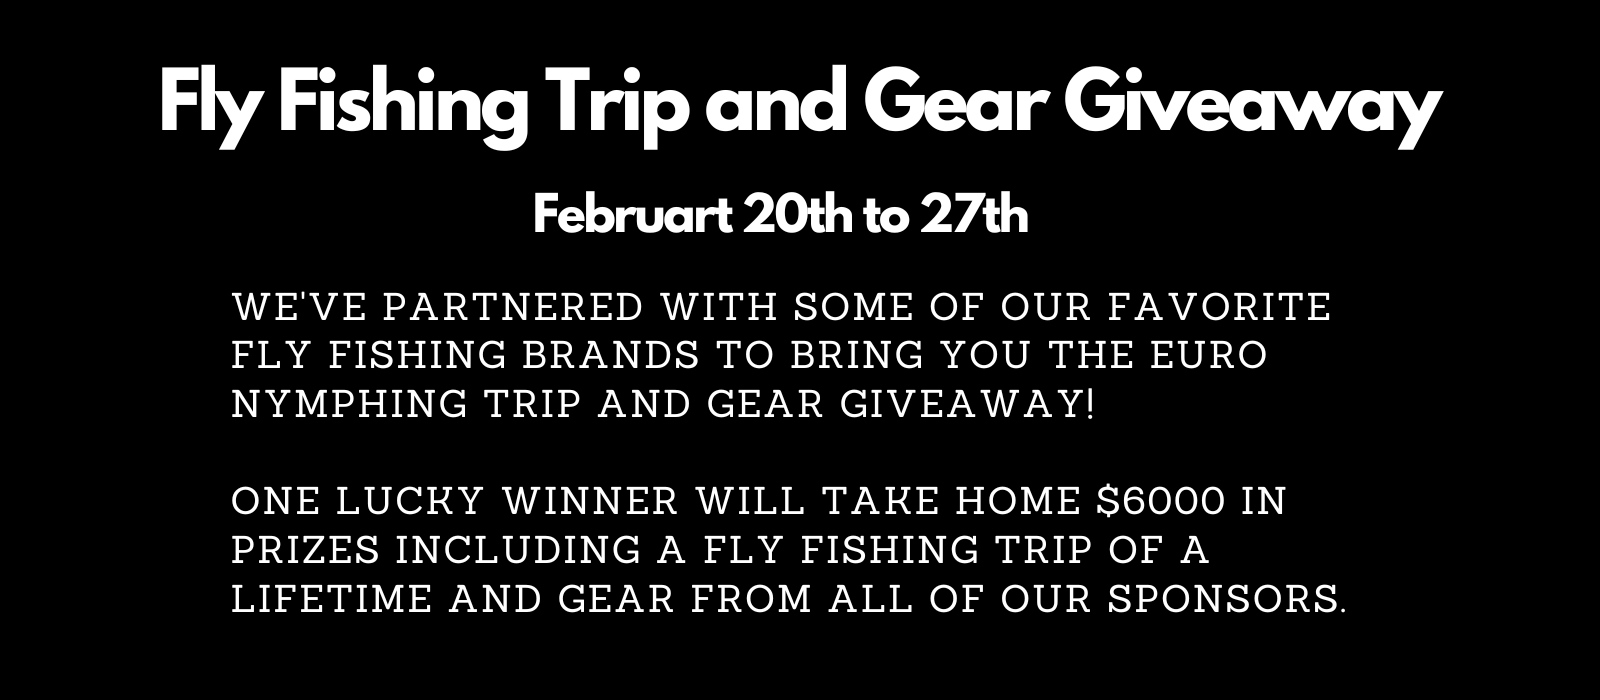 Win a Fly Fishing Trip to the Euro Nymphing School + Gear Giveaway